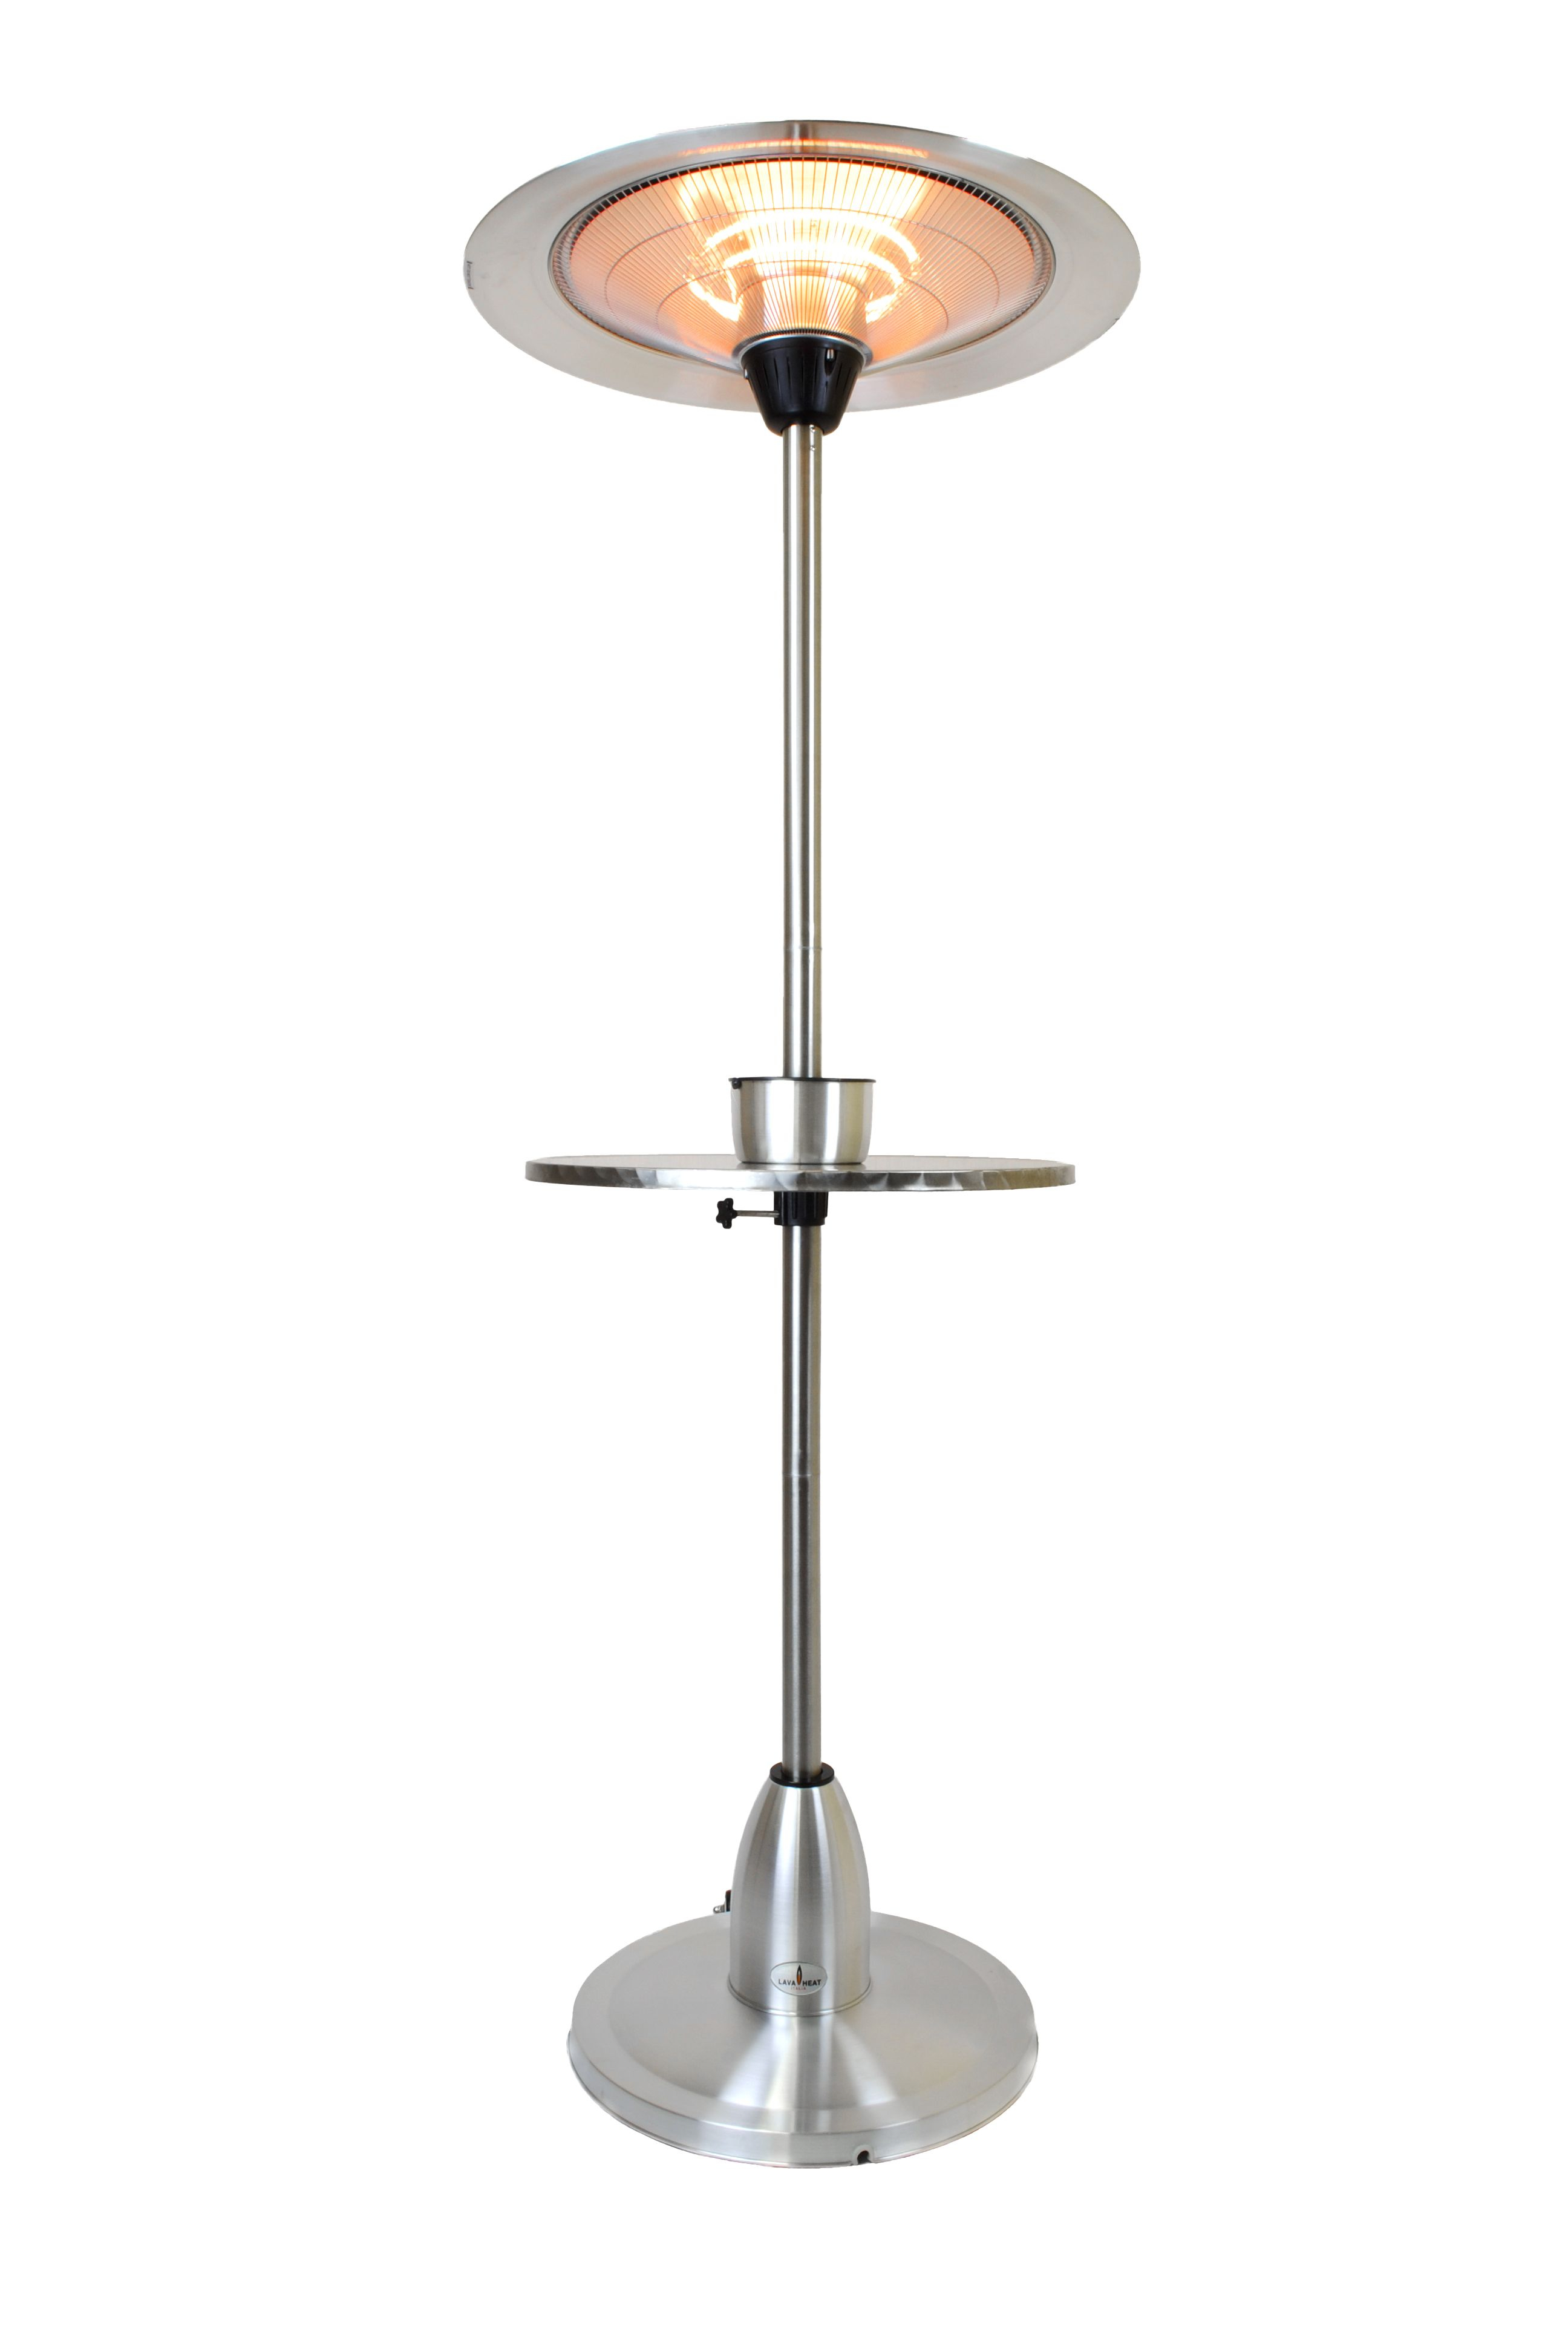 Pub Table Deluxe Patio Heater Stainless Steel Patio within dimensions 2592 X 3872